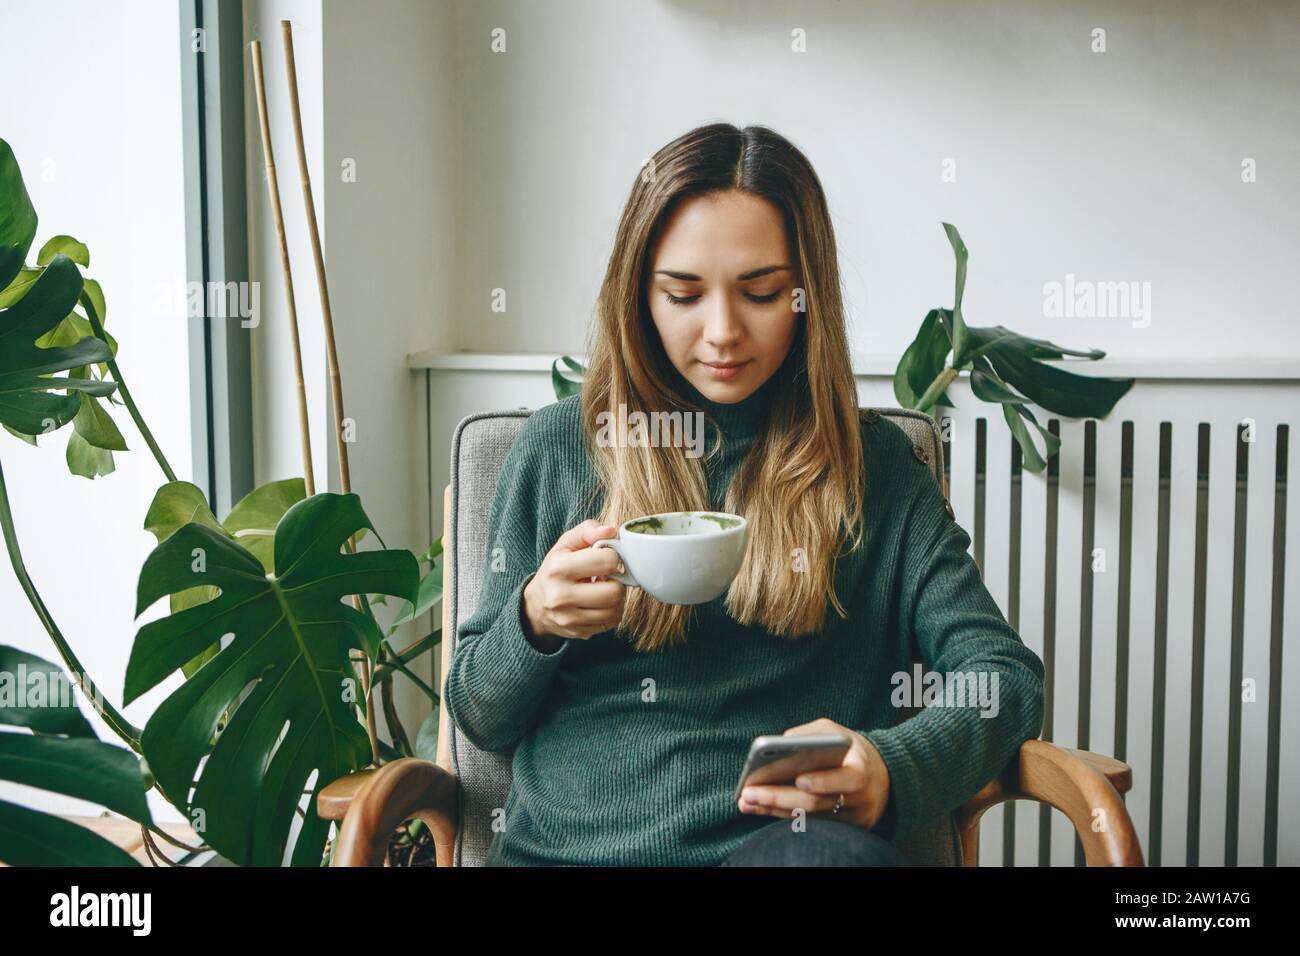 Girl drinks a hot morning drink and uses a cell phone. Stock Photo